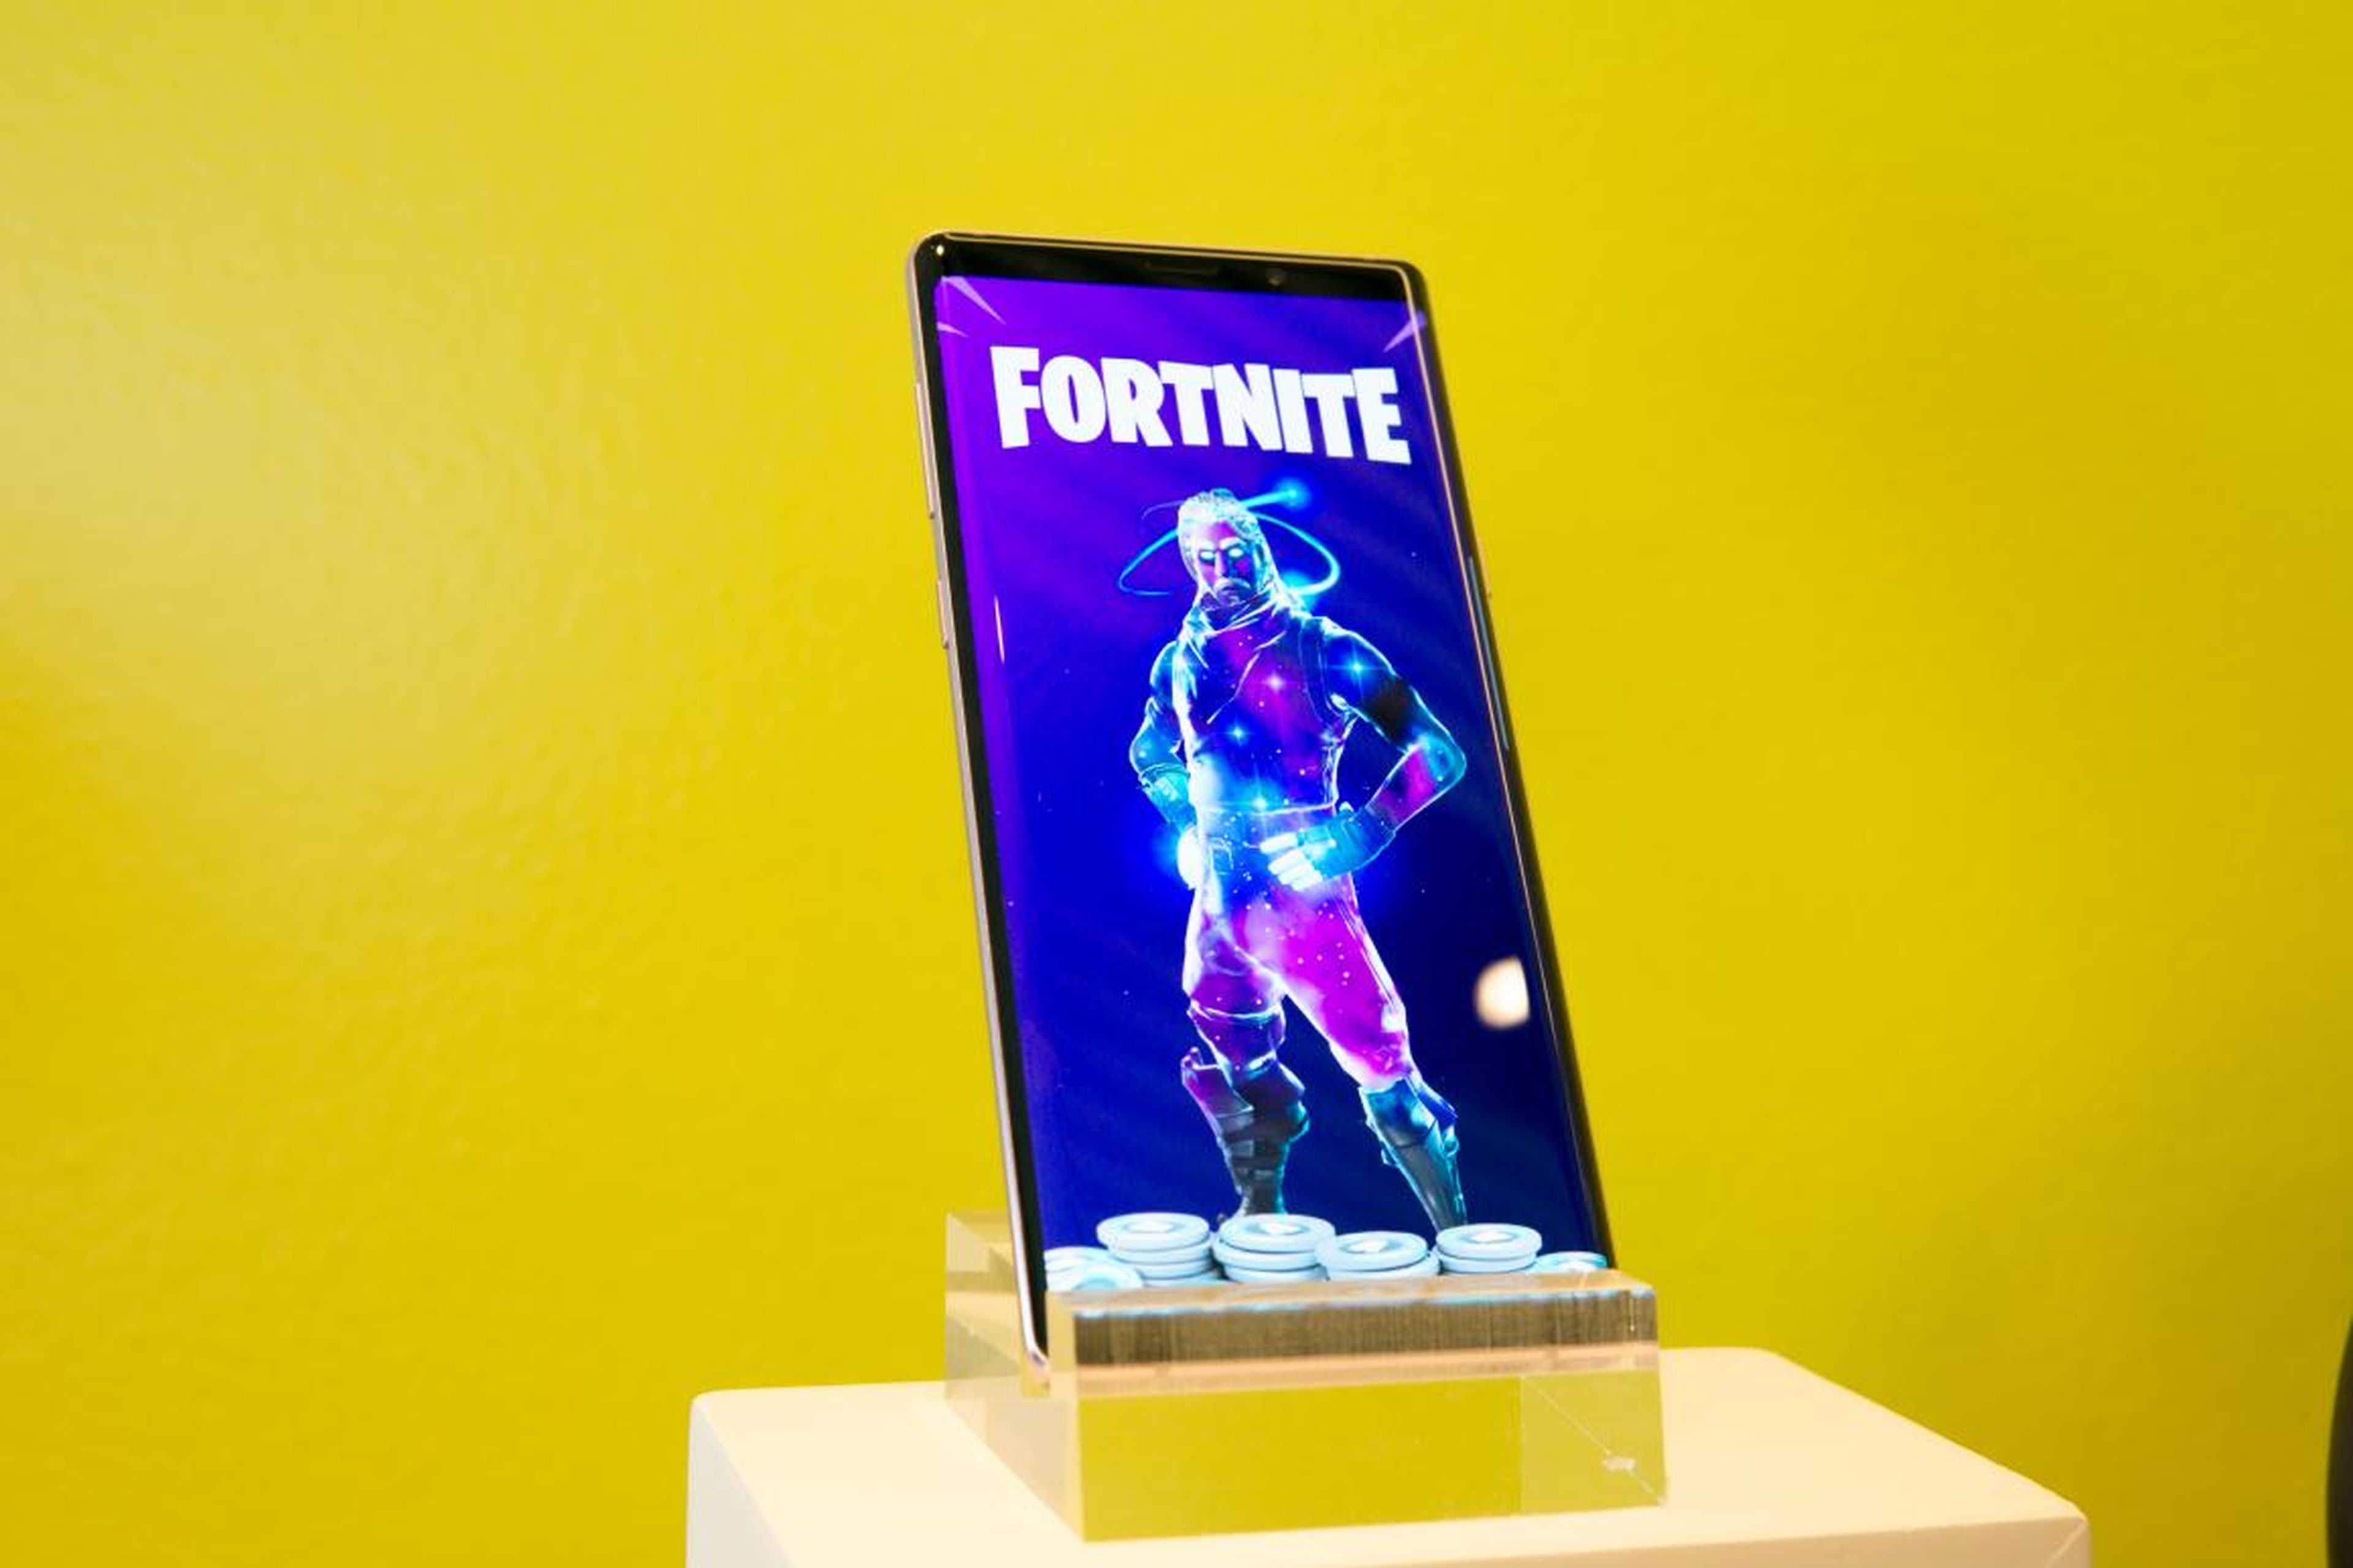 "Fortnite" launched on Android smartphones recently, but it skipped Google's Play Store.